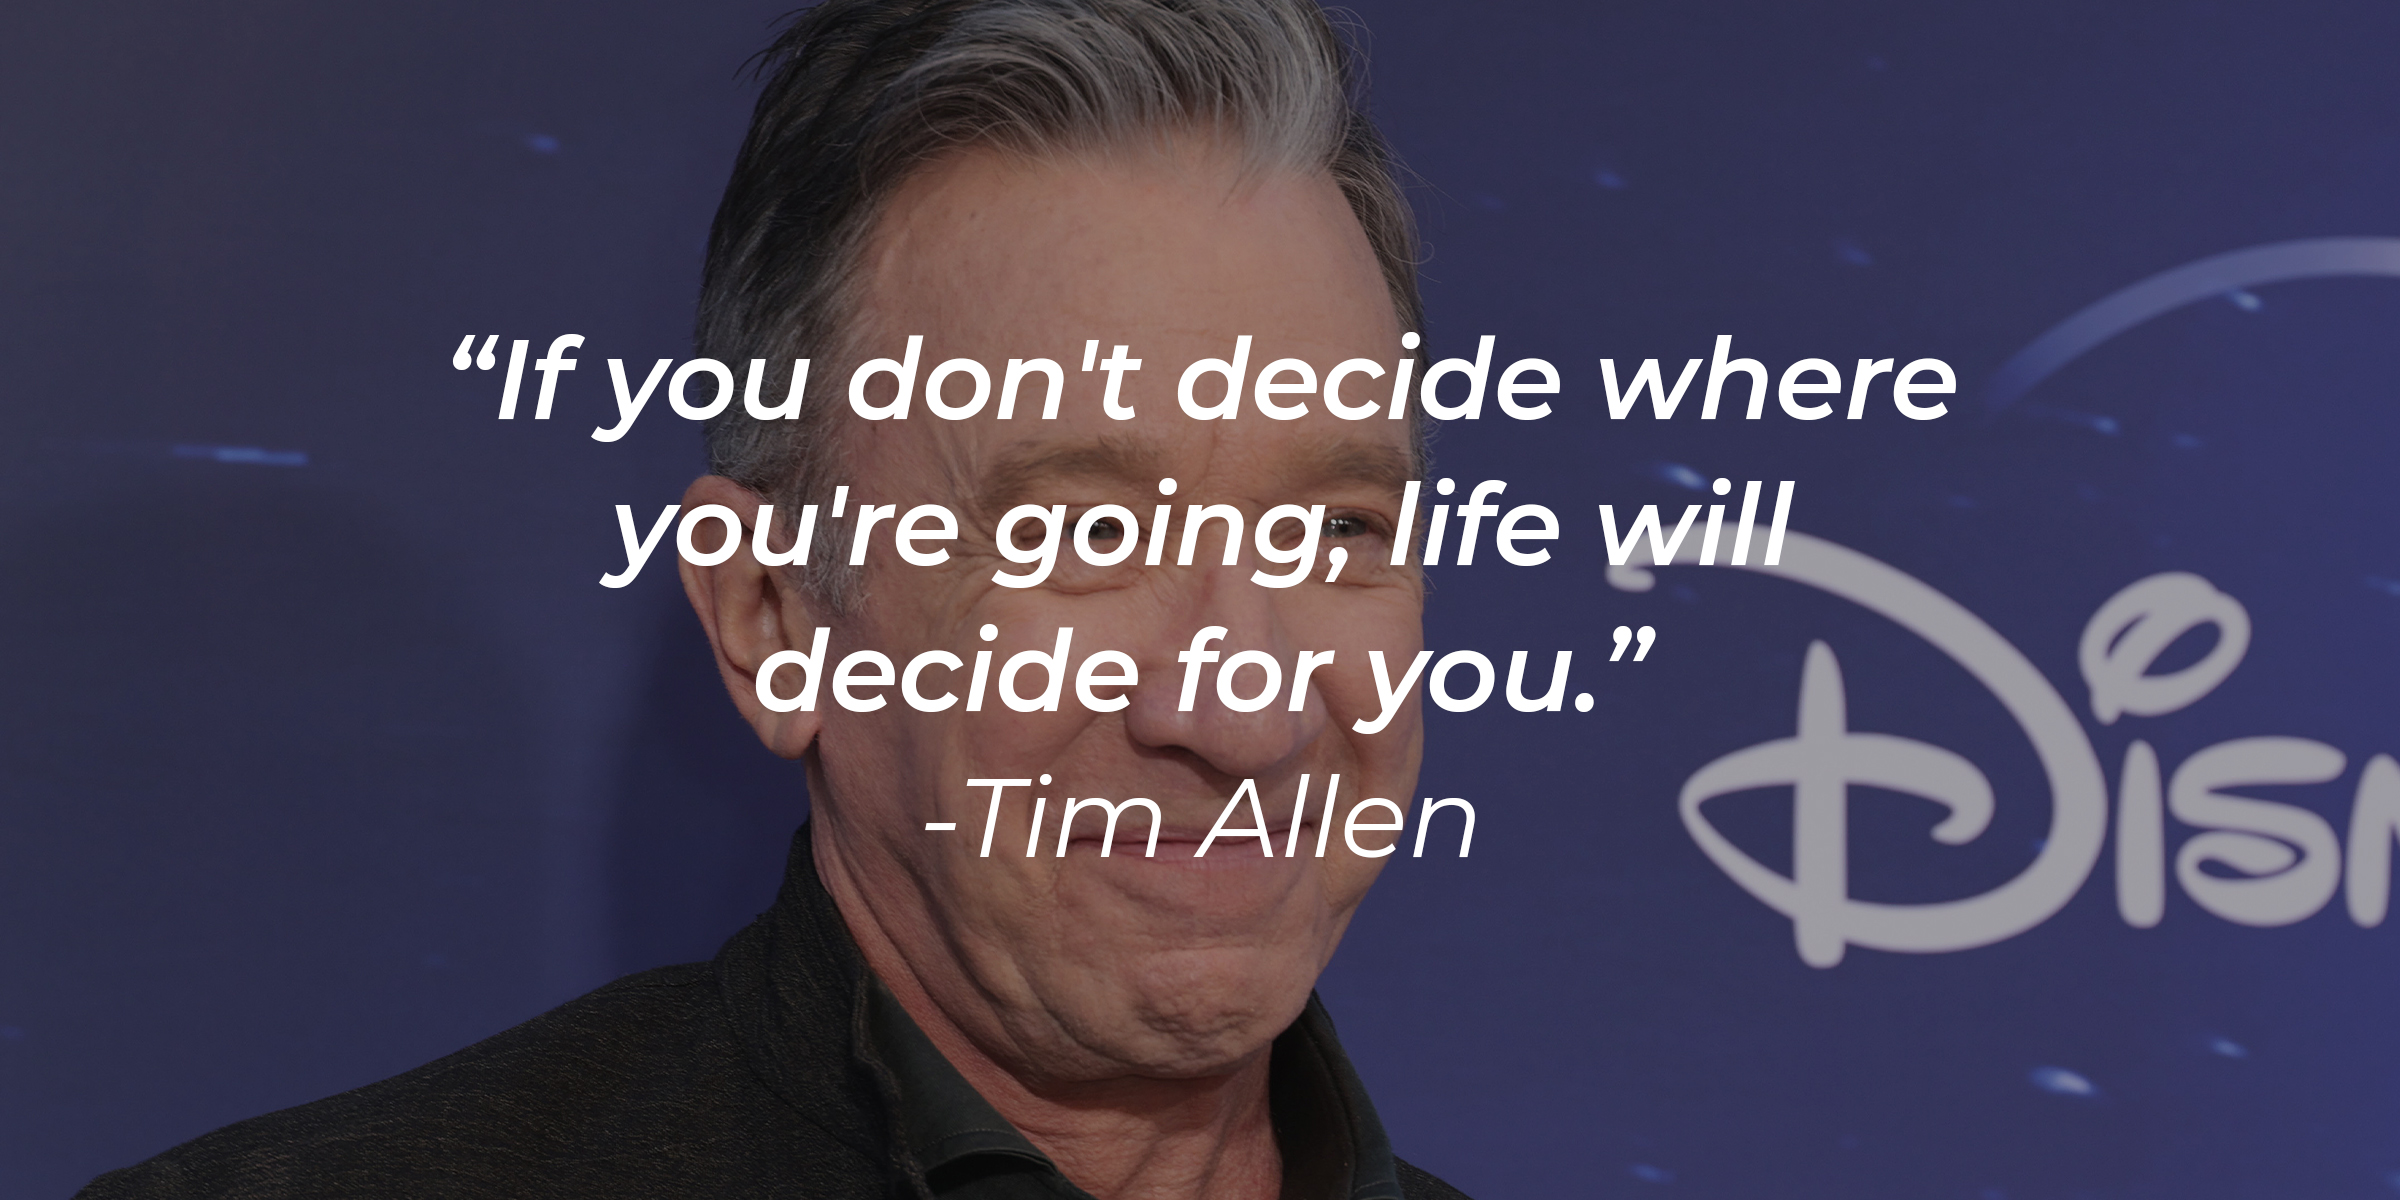 An image of Tim Allen, with his quote: “If you don't decide where you're going, life will decide for you.”┃Source: Getty Images